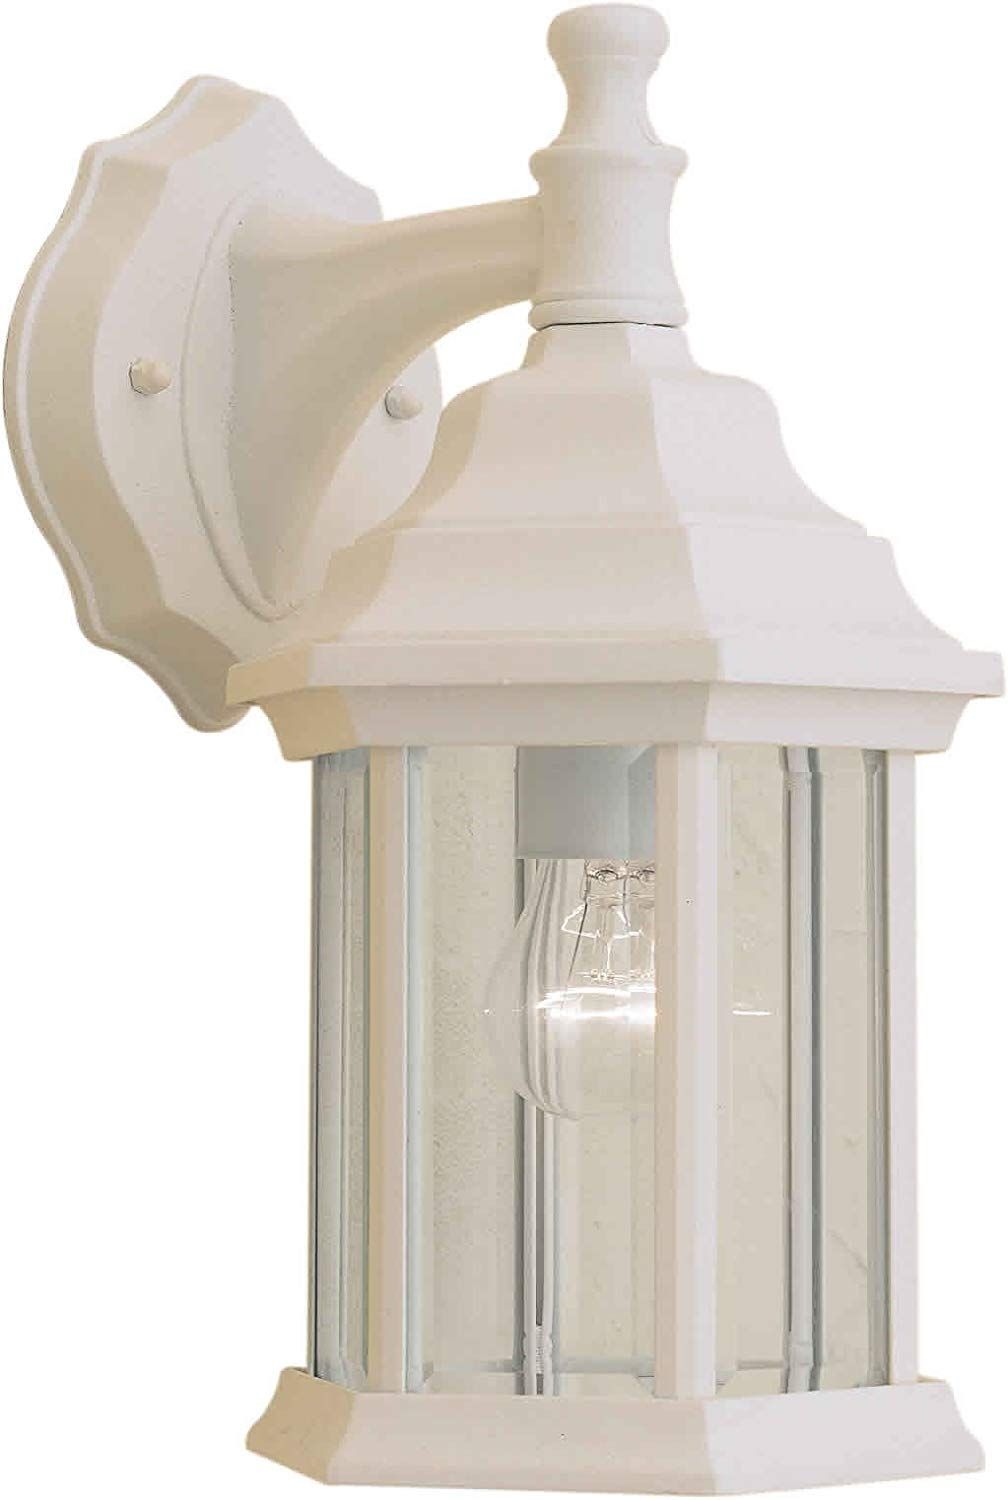 Forte Lighting 1715 01 13 Exterior Wall Light With Clear Beveled In Outdoor Lanterns At Amazon (View 4 of 20)